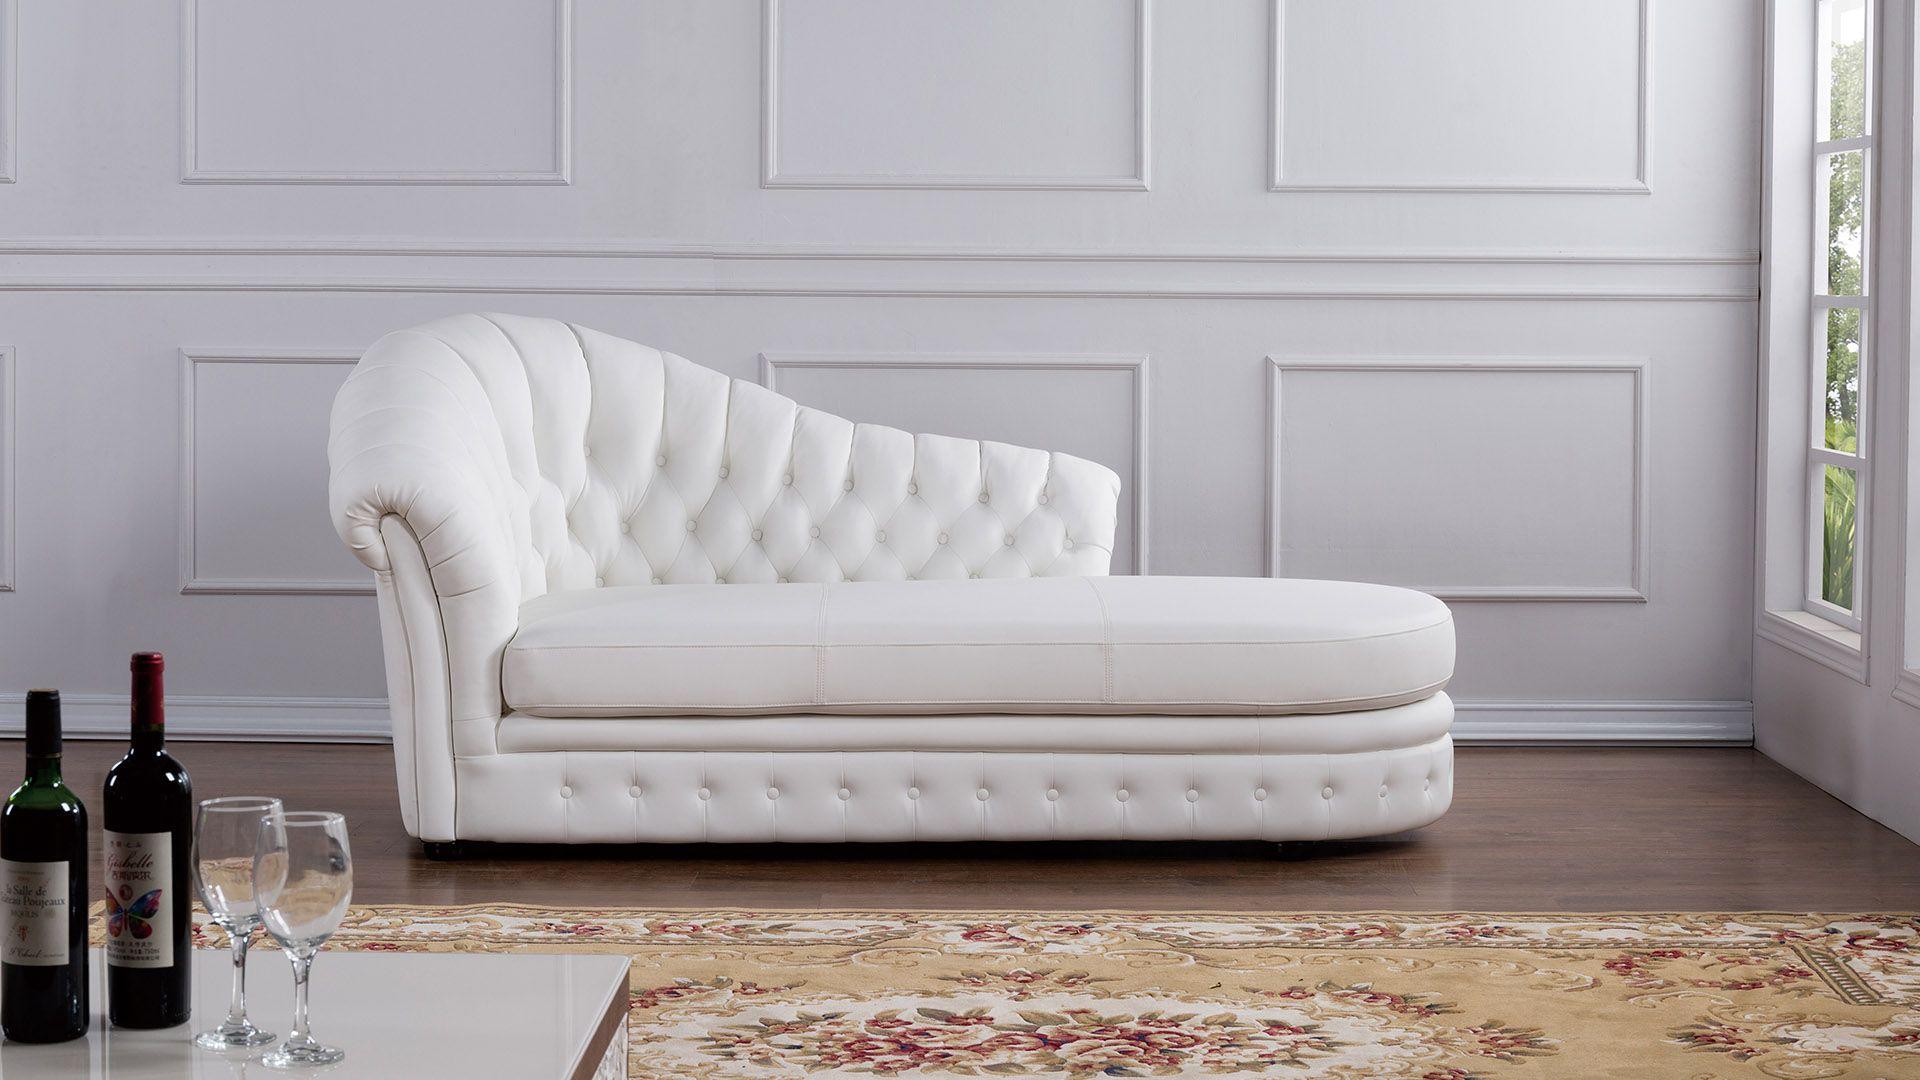 Modern Sofa Chaise AE-L500L-W AE-L500R-W in White Faux Leather